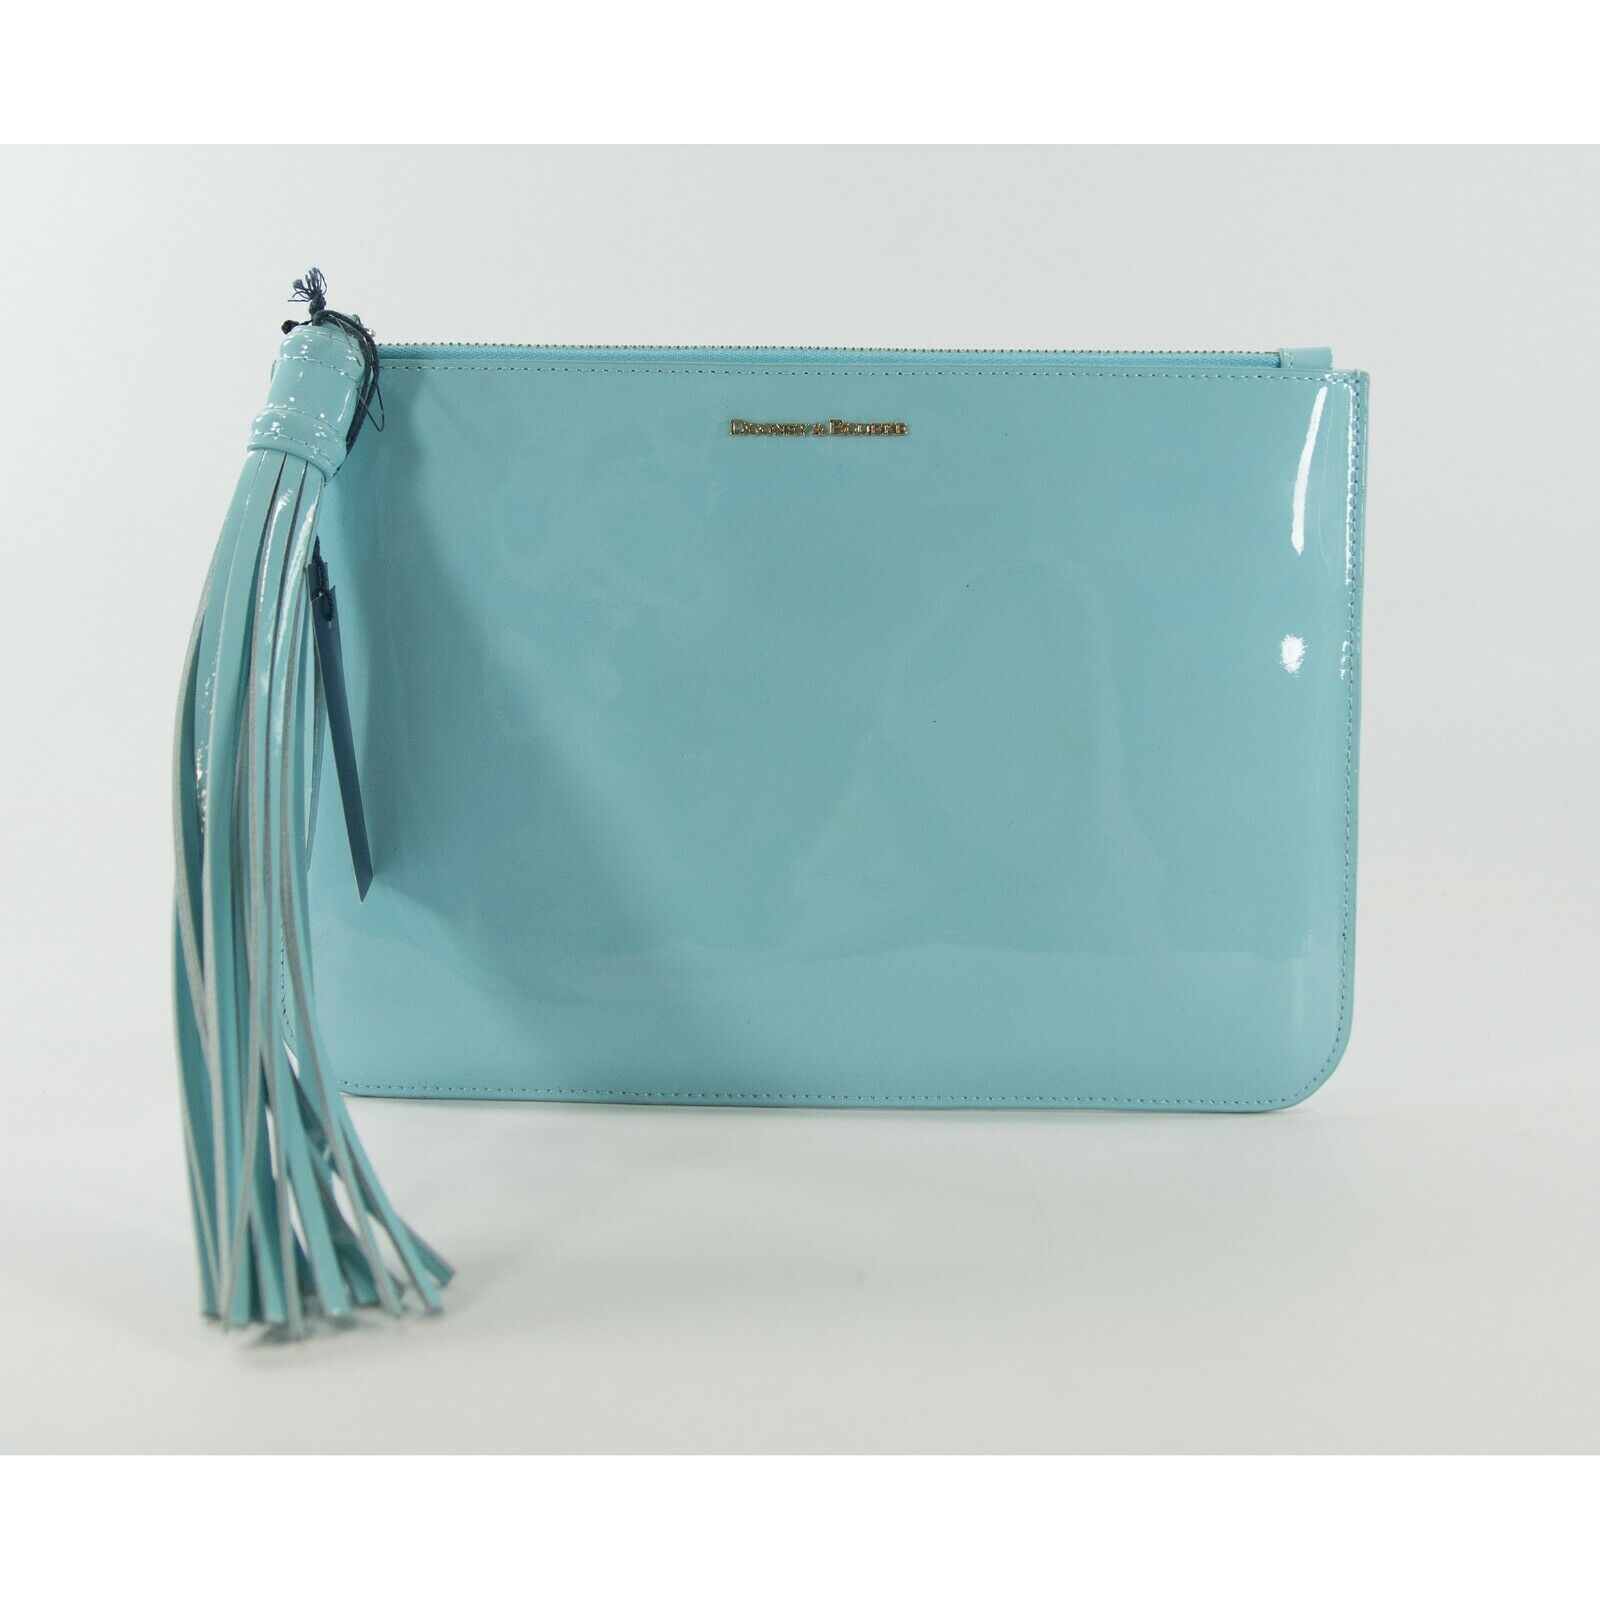 Primary image for Dooney & Bourke Carrington Patent Leather Pale Blue Large Pouch Clutch Bag NWT